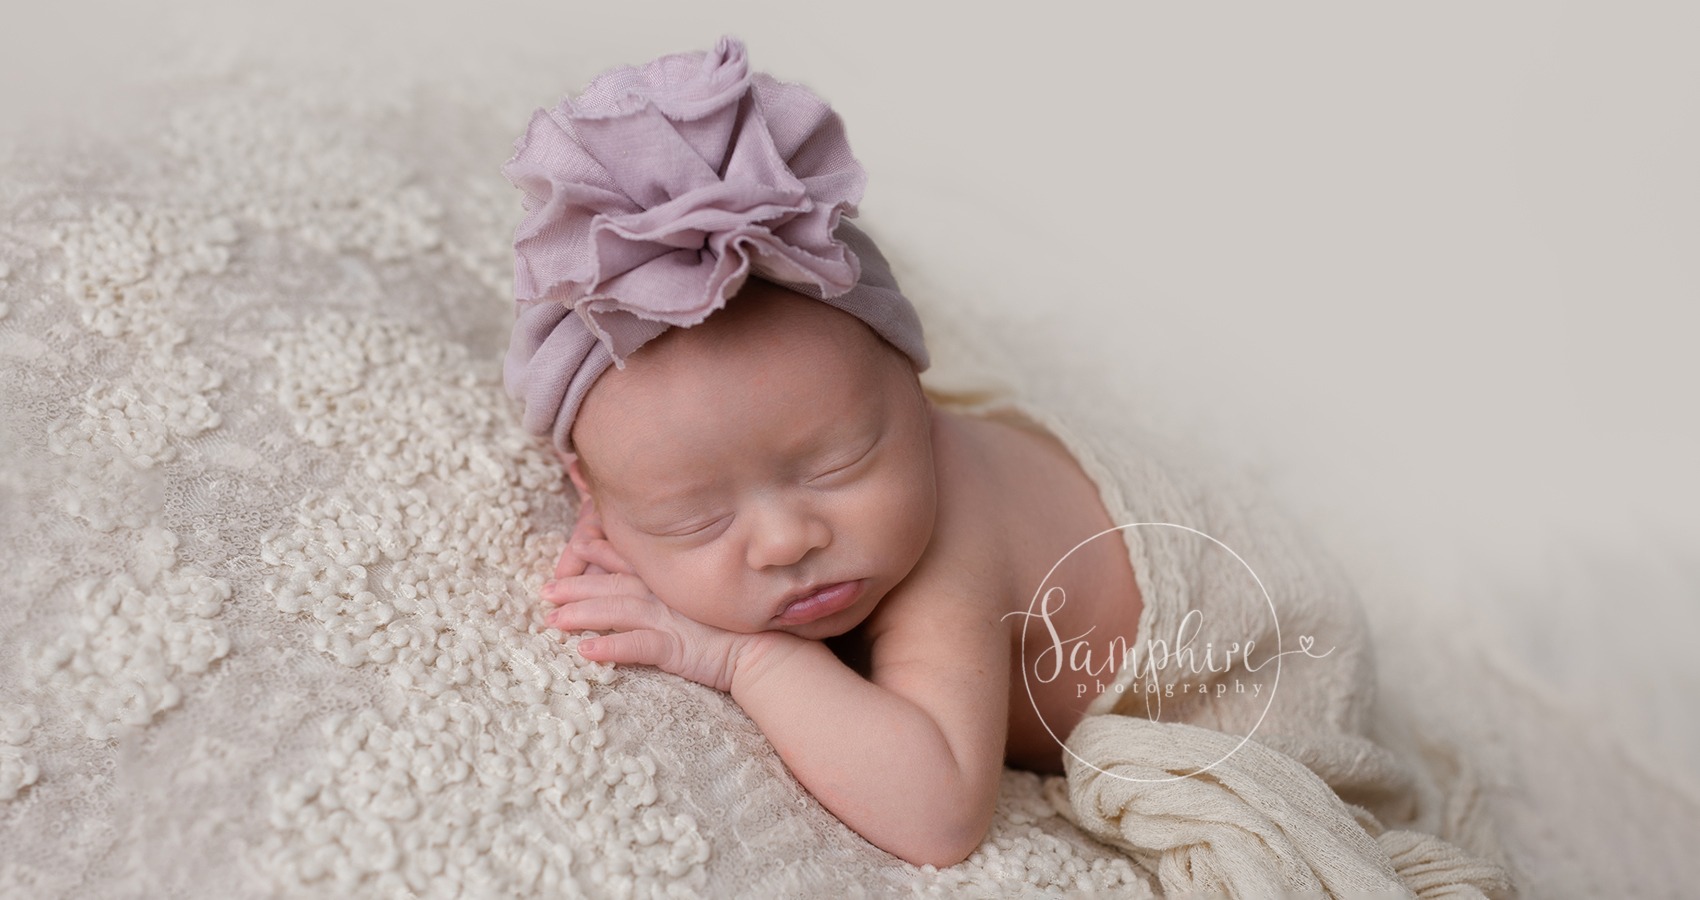 baby girl photographed at newborn photoshoot by Horsham photographer in sussex with a pink hat